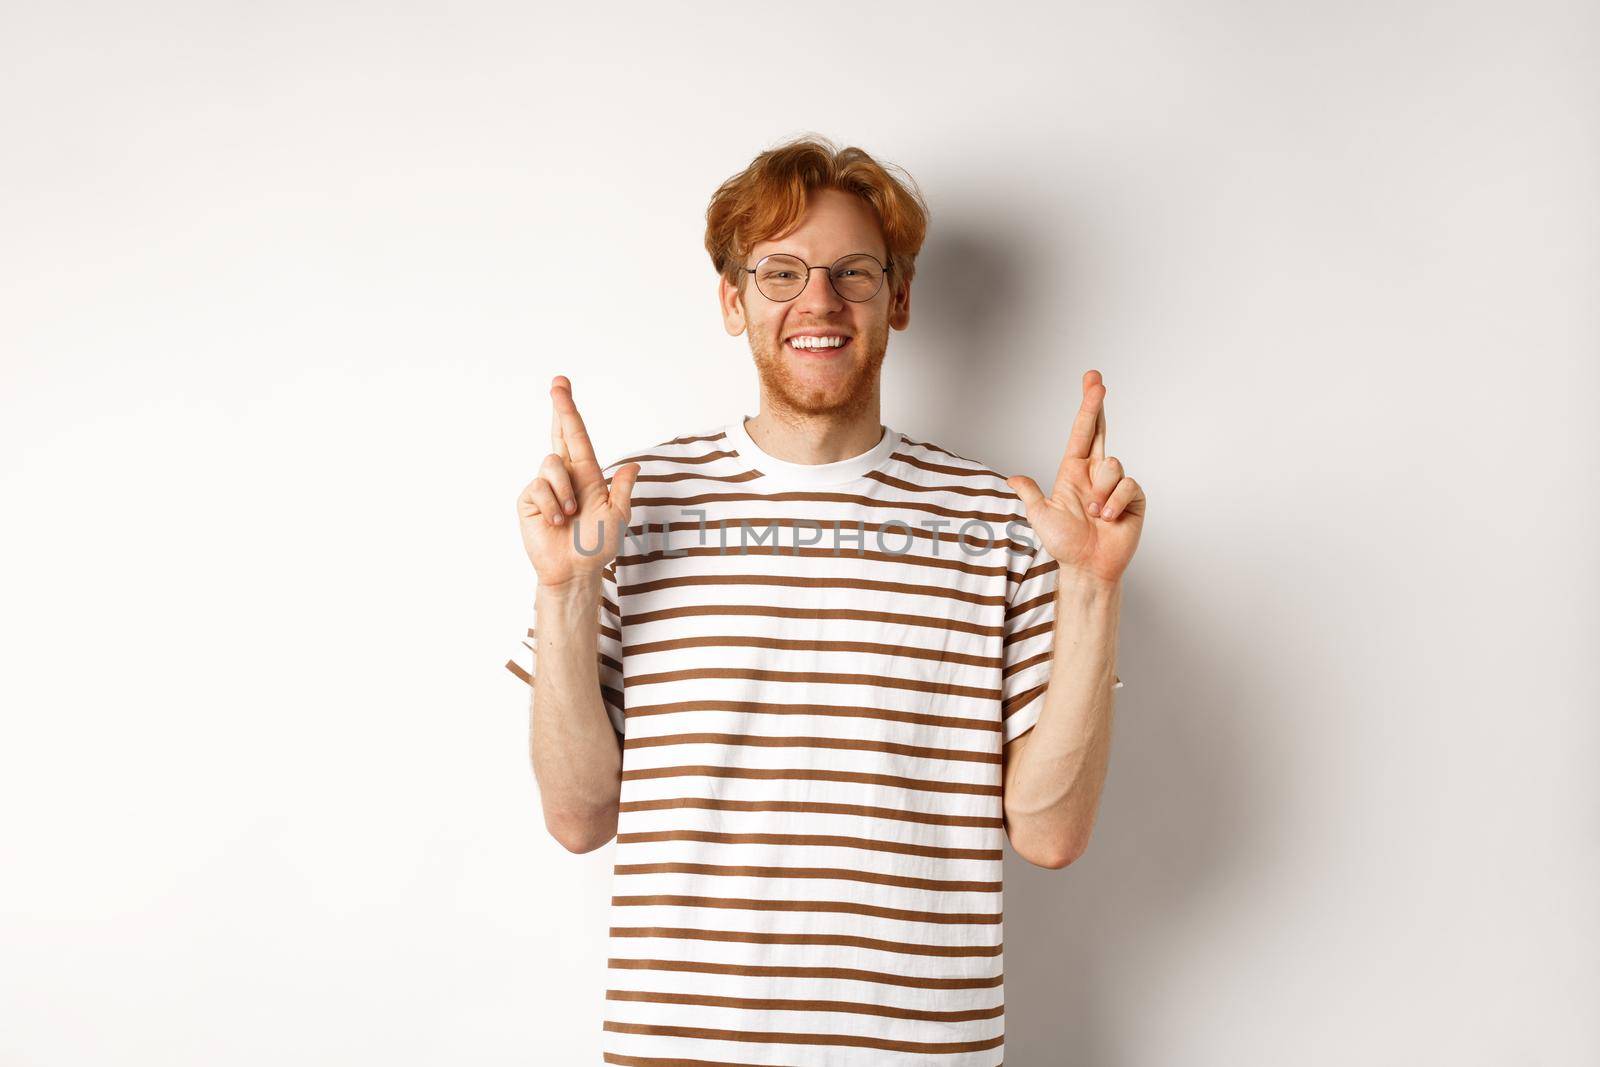 Hopeful and optimistic man with ginger hair and glasses having hope, making wish and cross fingers for good luck, smiling at camera, white background.